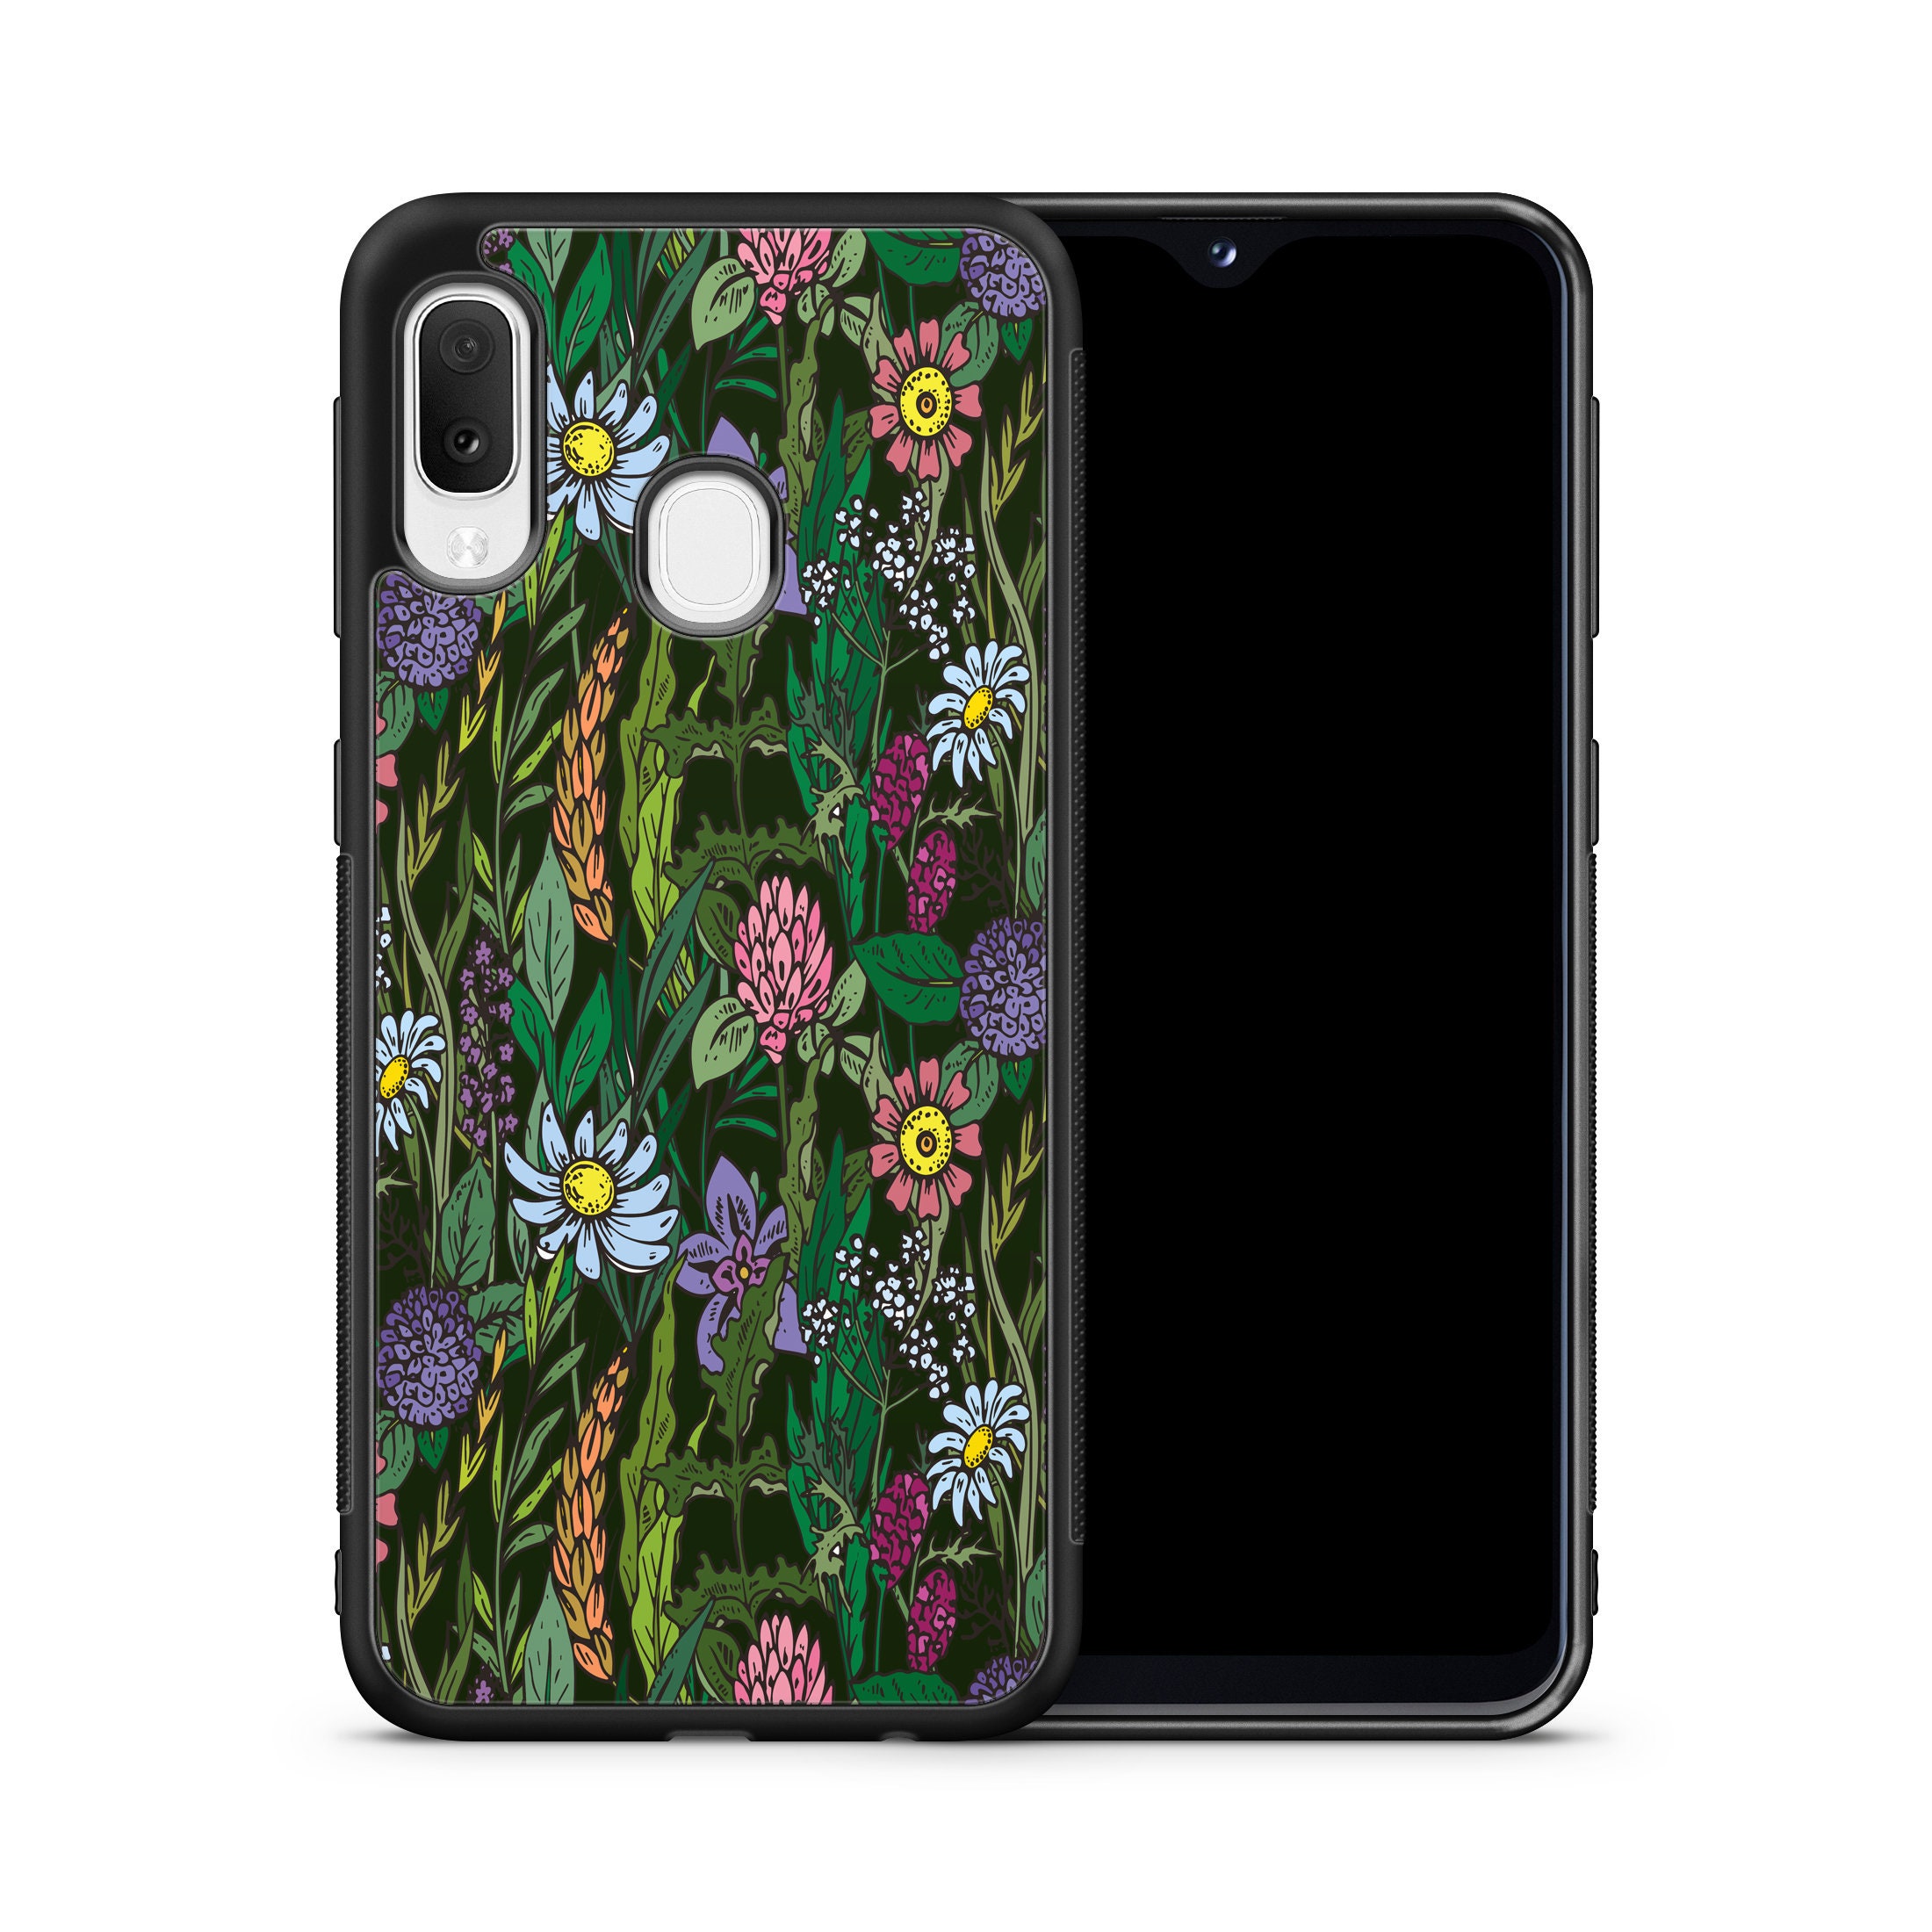 Aesthetic Flowers Case For Samsung A20 Case Galaxy A51 Case | Etsy